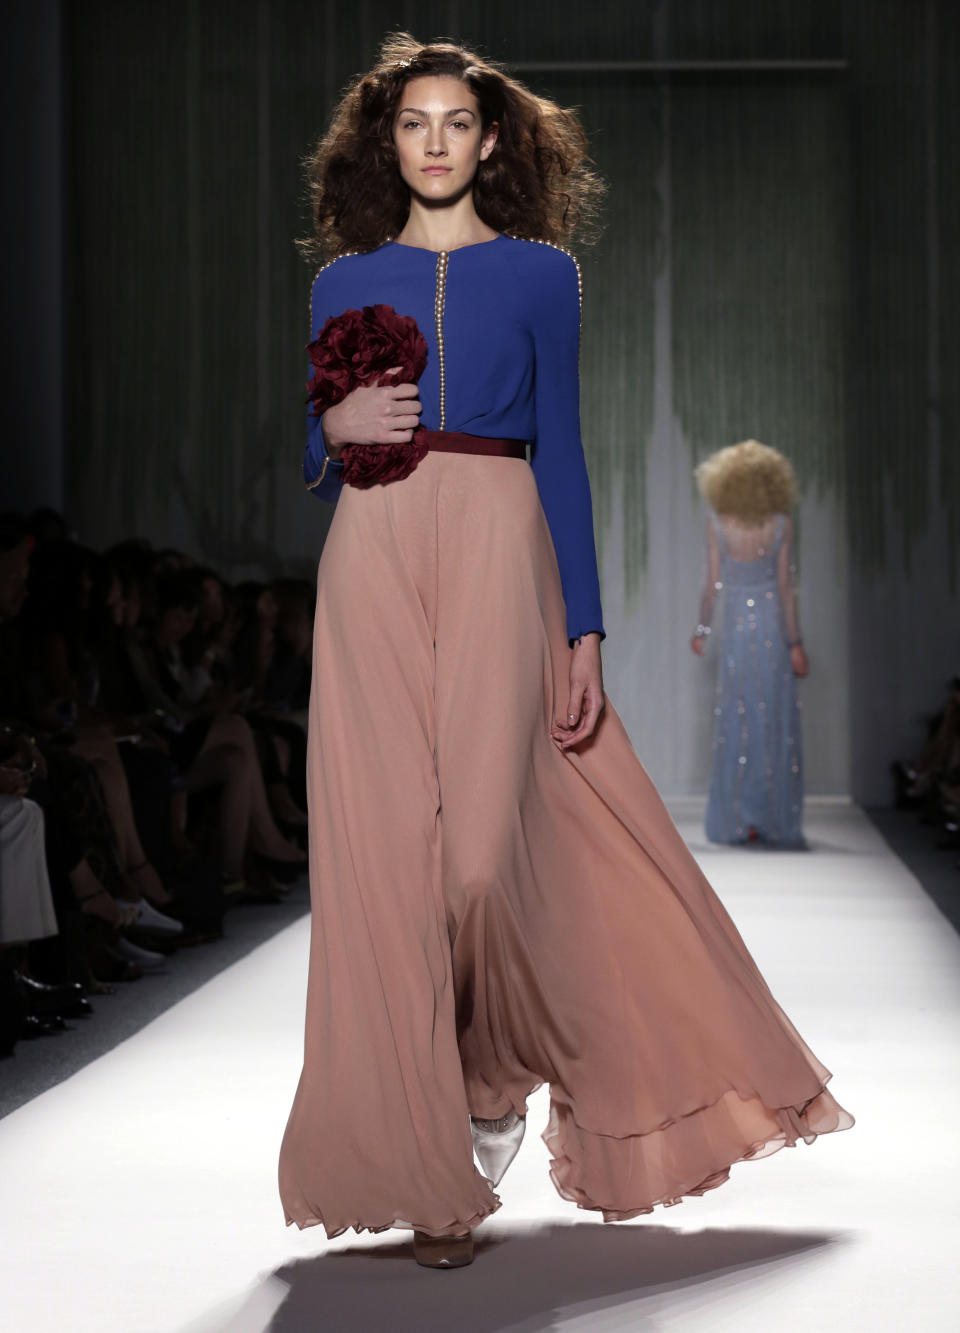 The Jenny Packham Spring 2014 collection is modeled during Fashion Week in New York, Tuesday, Sept. 10, 2013. (AP Photo/Richard Drew)